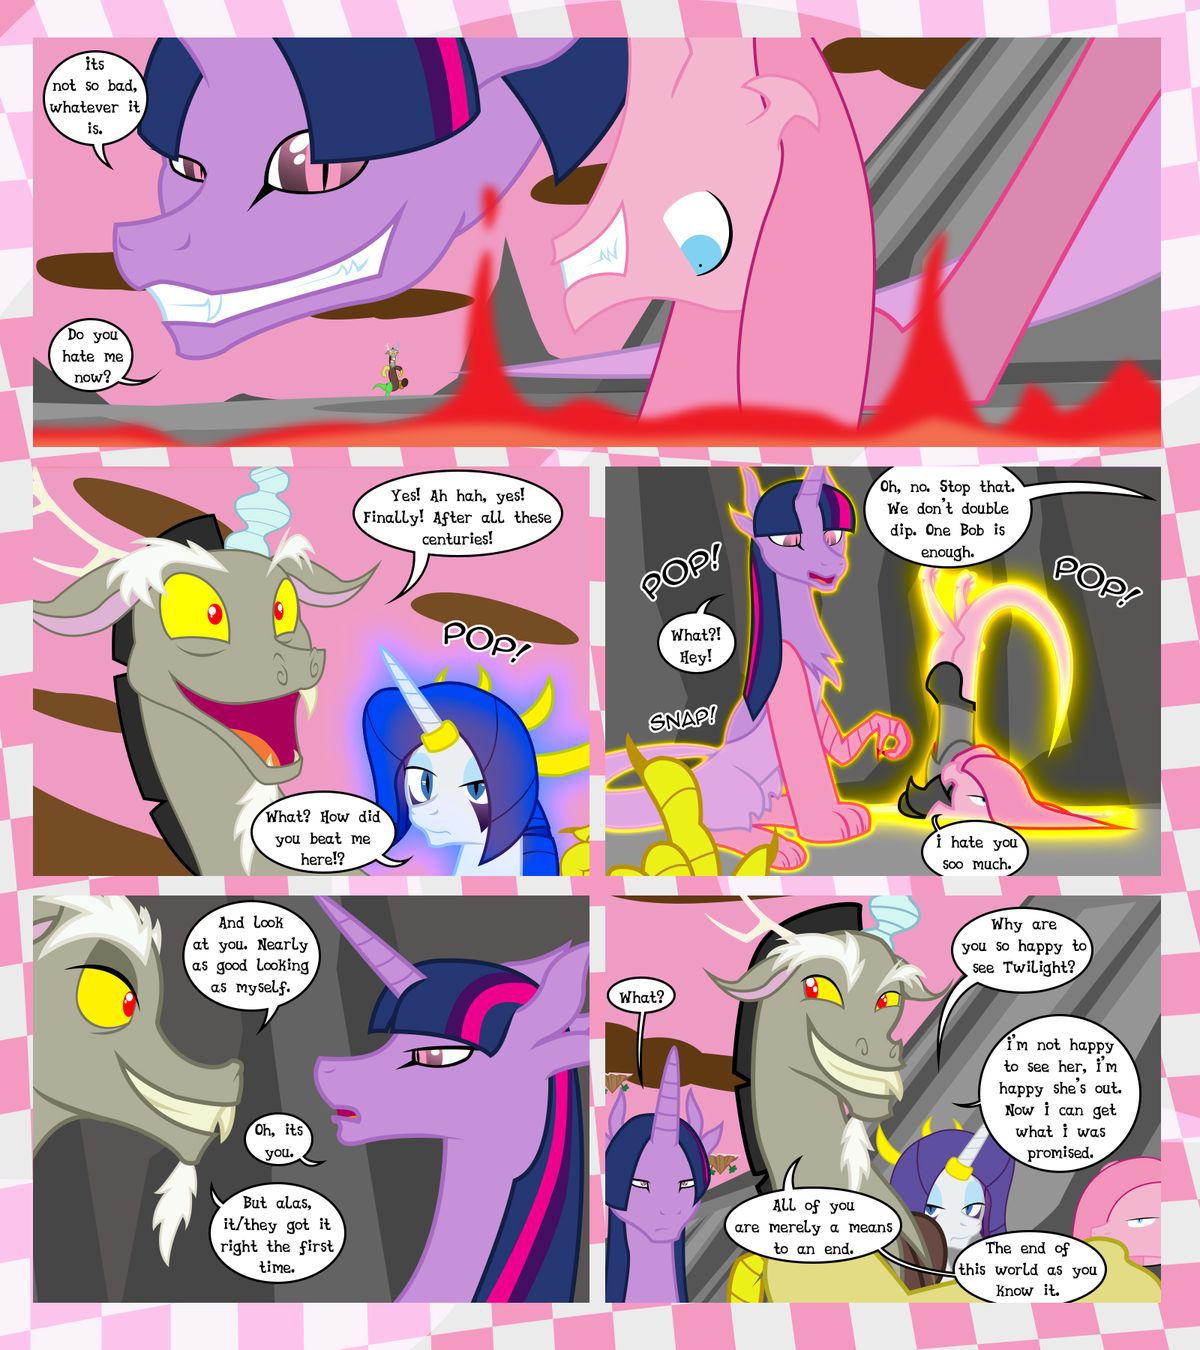 [GatesMcCloud] Cutie Mark Crusaders 10k: Chapter 3 - The Lost (My Little Pony: Friendship is Magic) [English] [Ongoing] 16